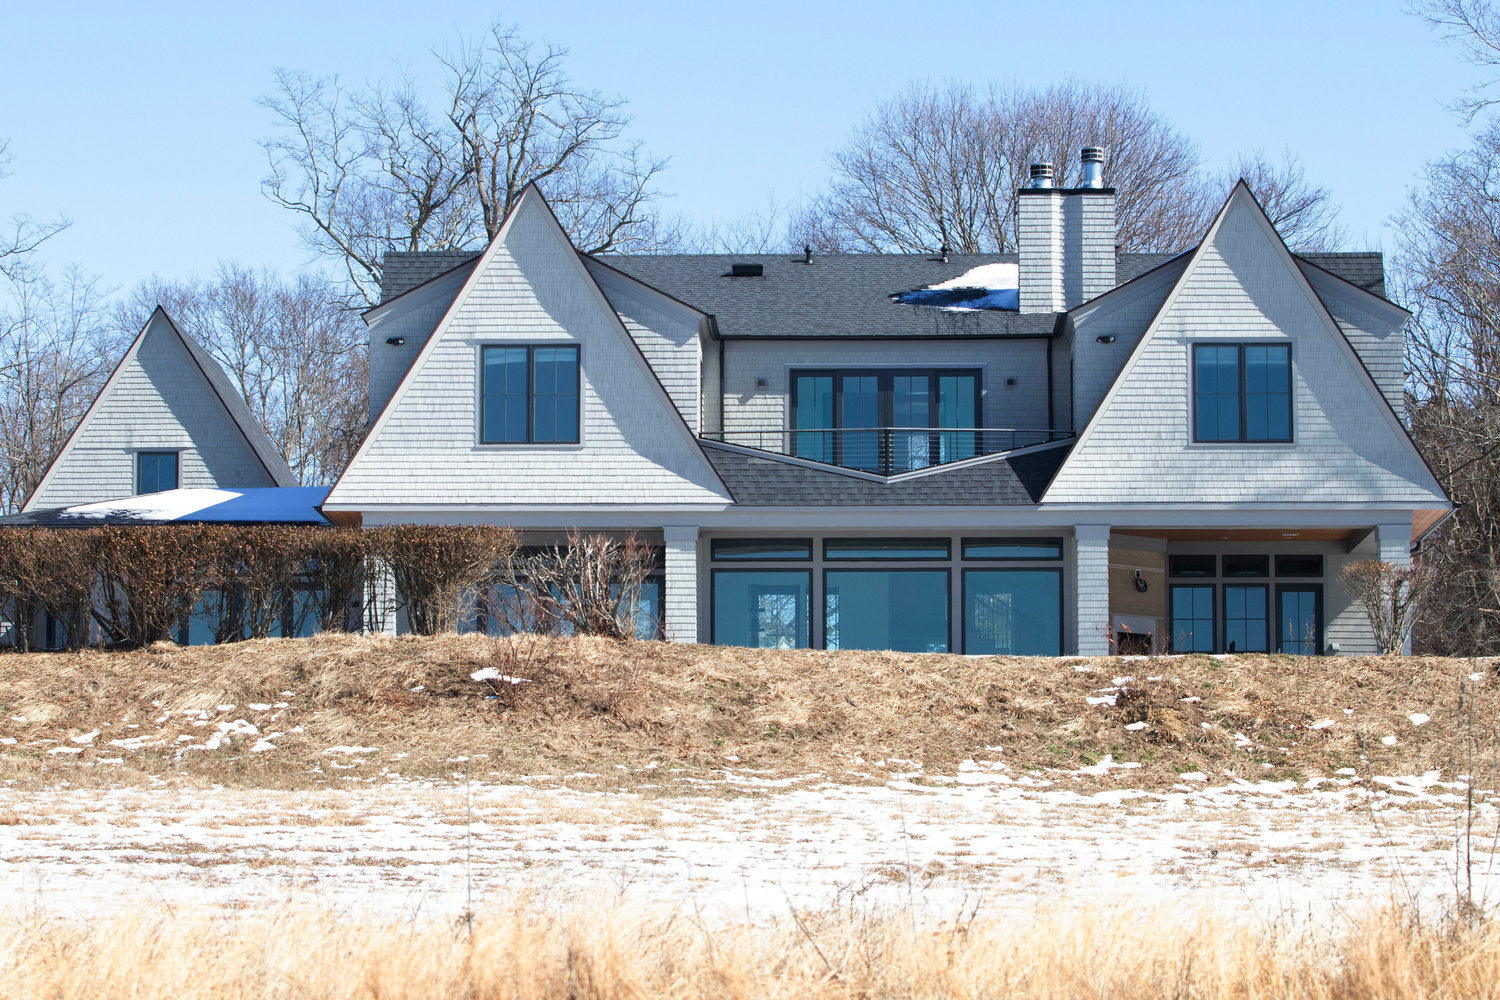 This Fessenden Road home sold recently for $4.75 million. It sits on more than two acres of land overlooking Narragansett Bay.